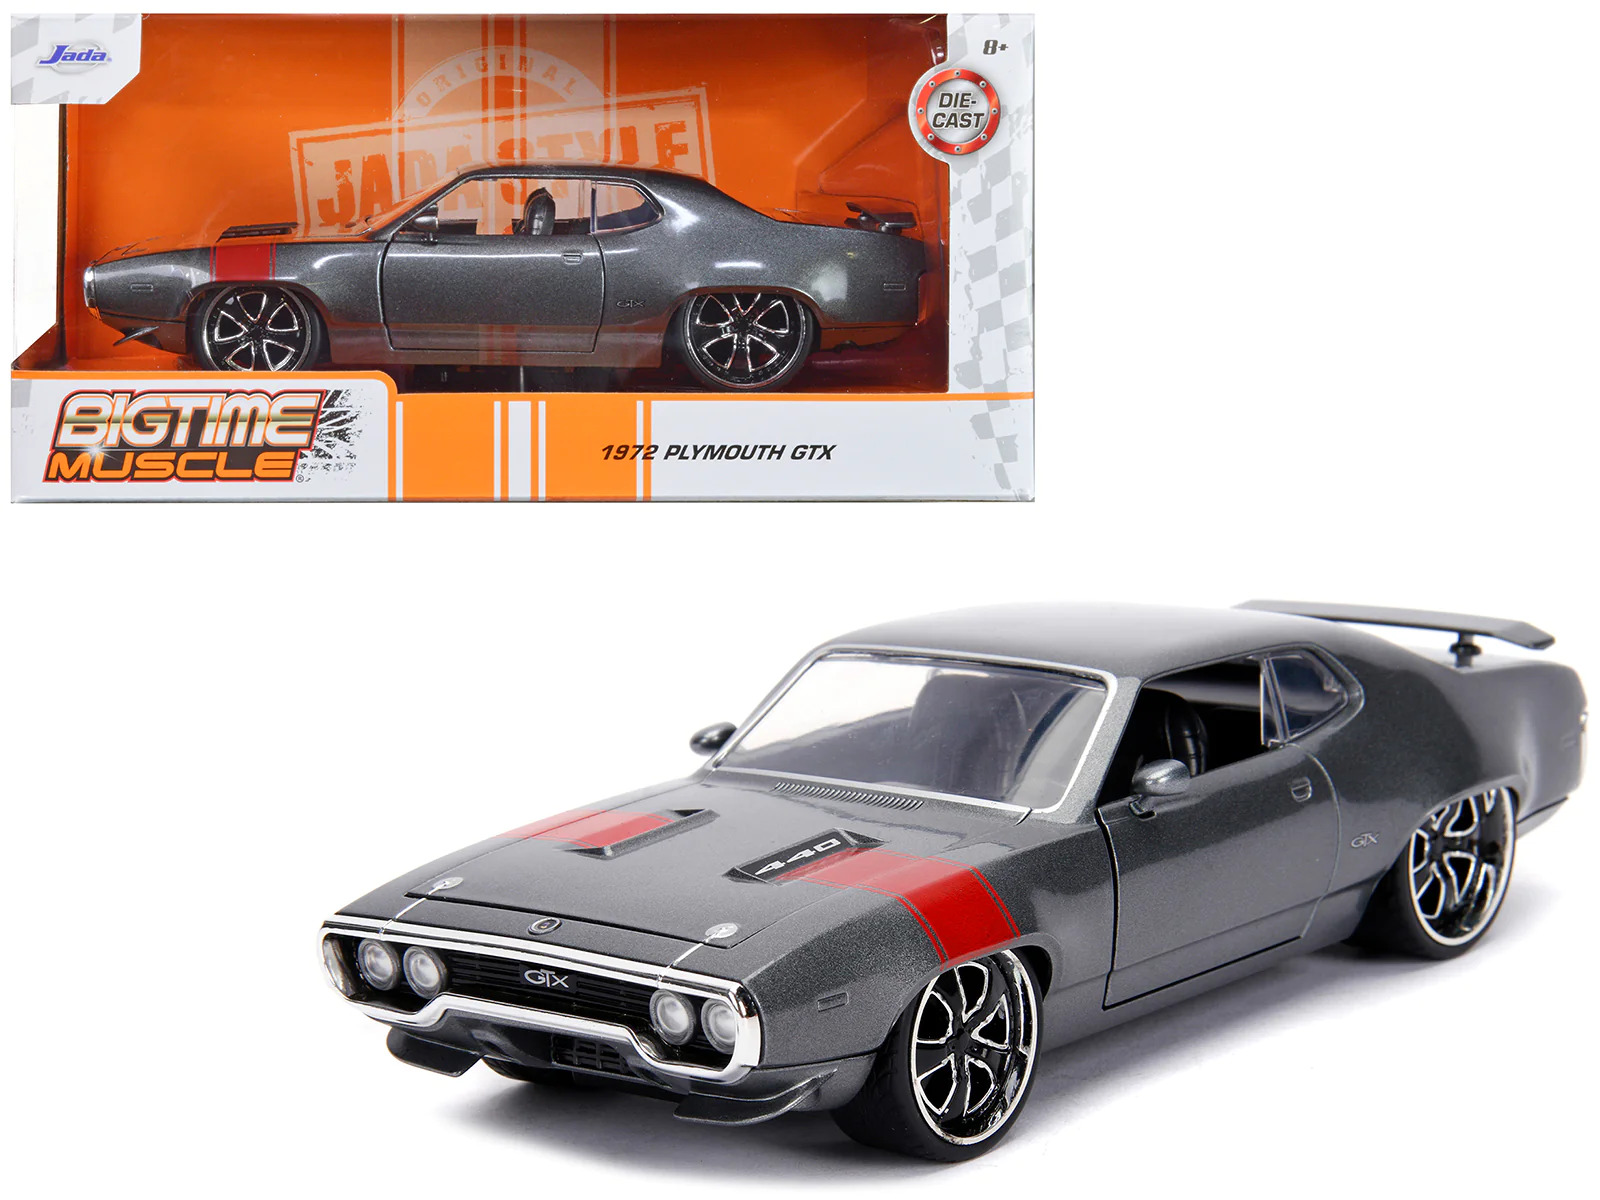 1972 Plymouth GTX 440 Metallic with Stripe Bigtime Muscle 1/24 Diecast Model Car